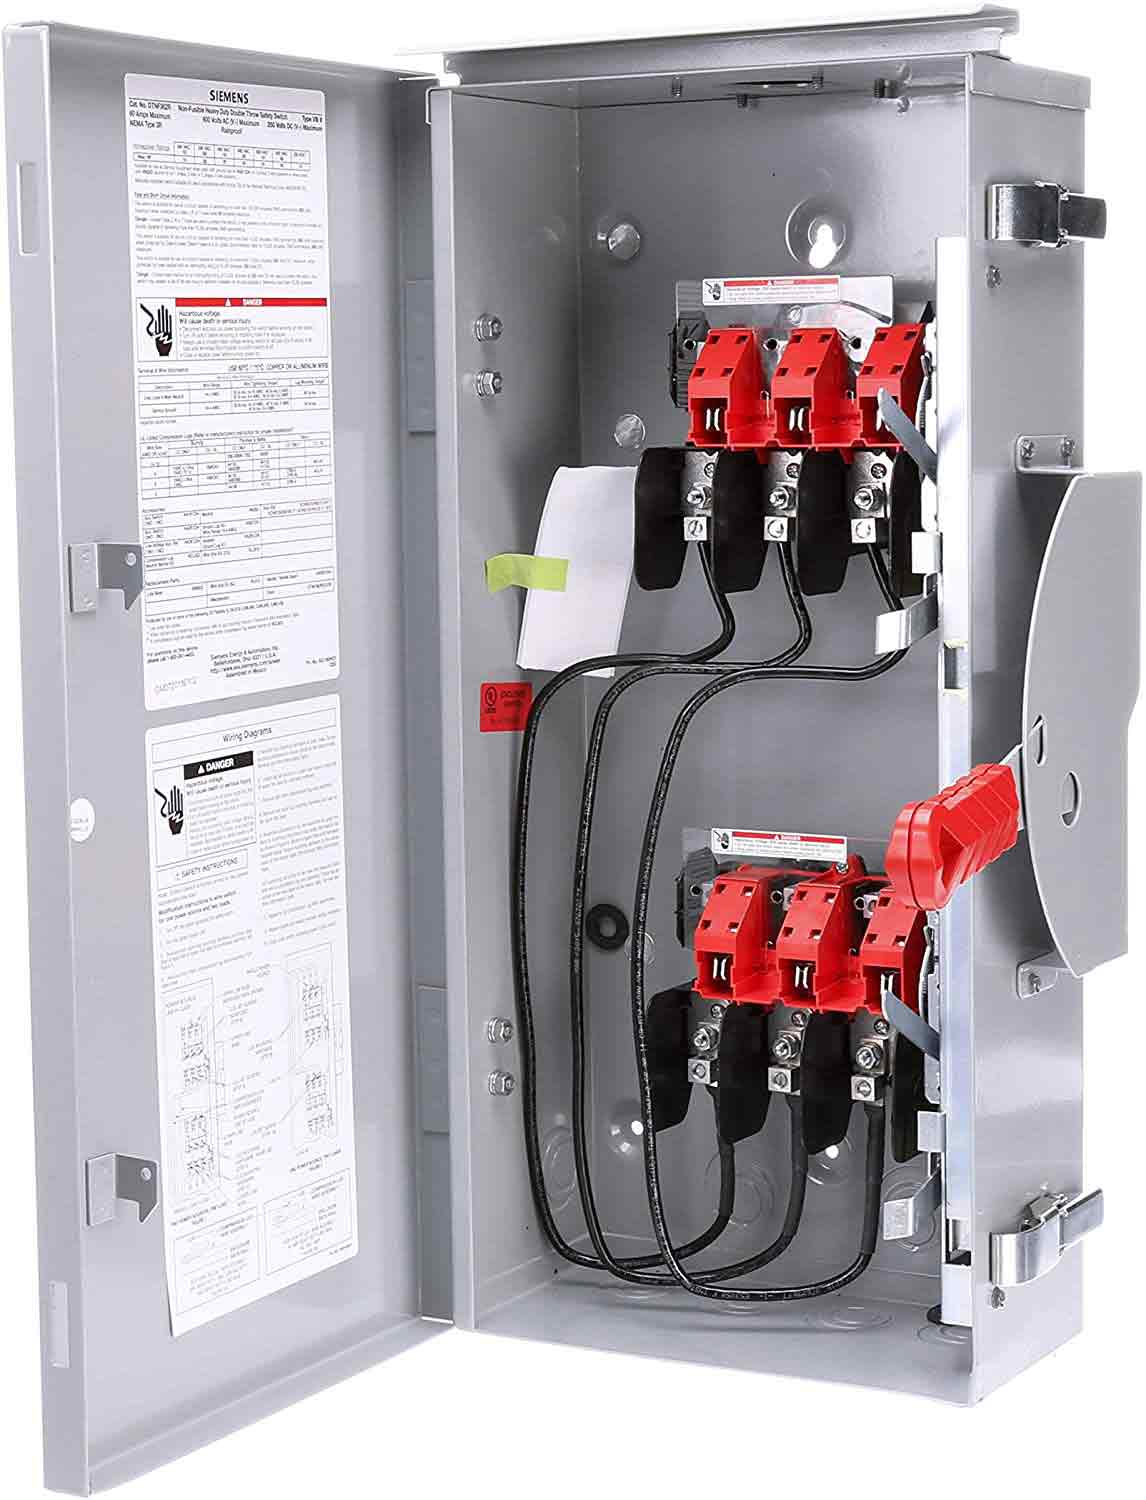 DTNF362R - Siemens - 60 Amp Disconnect Safety Switches